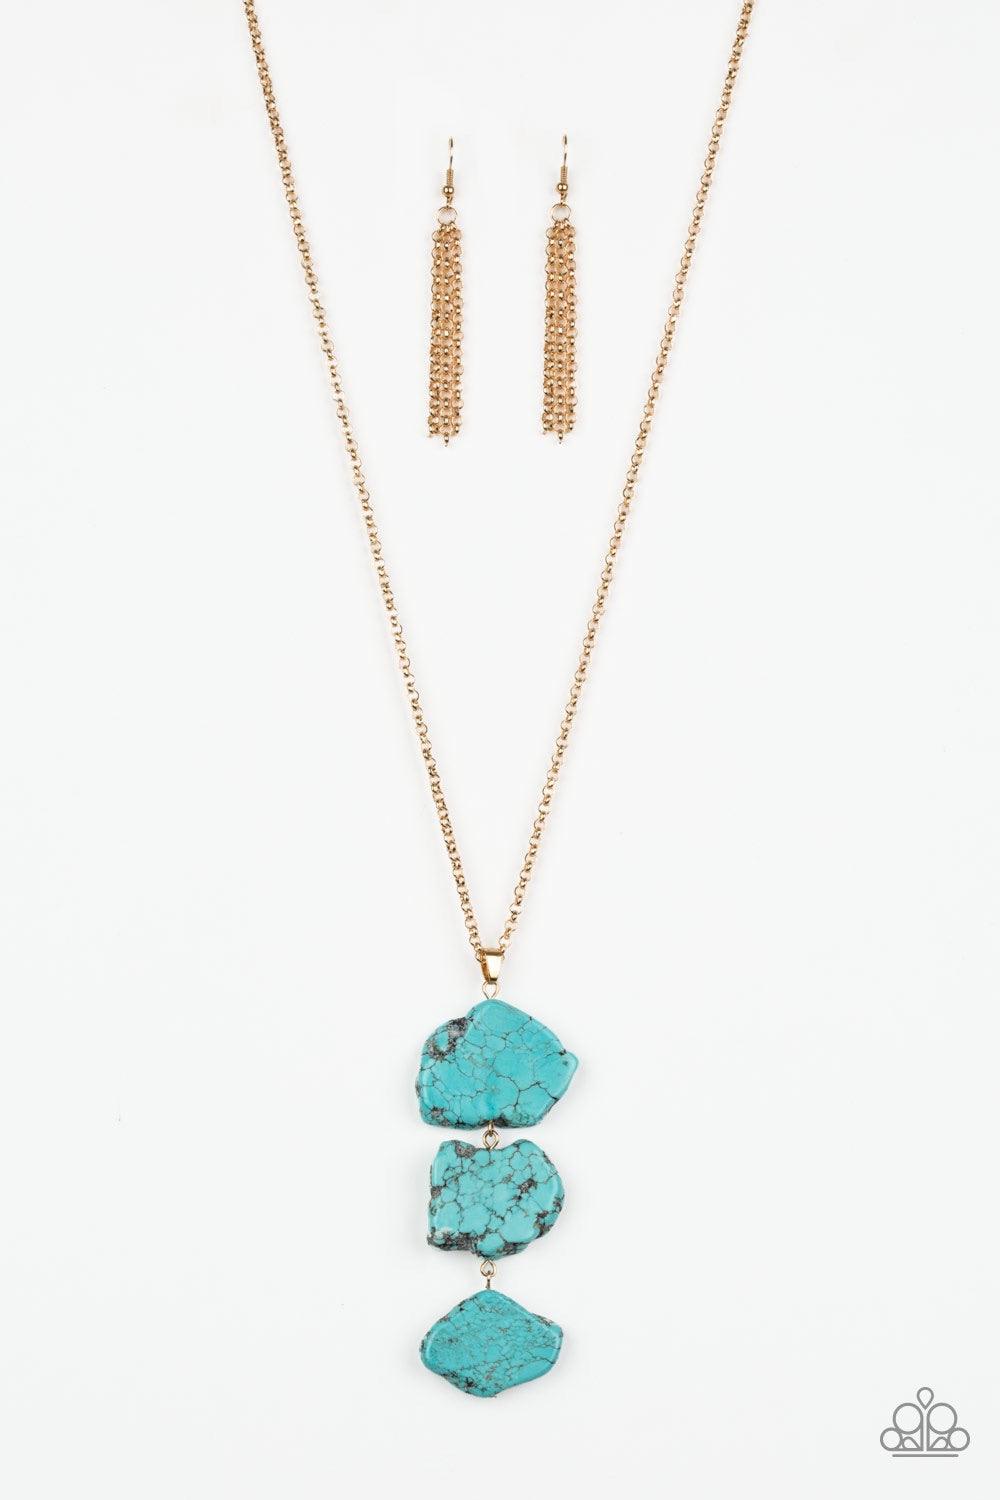 Paparazzi Accessories On The ROAM Again - Gold As if chipped off a cliff, pieces of turquoise rock link at the bottom of a lengthened gold chain for an earthy look. As the stone elements in this piece are natural, some color variation is normal. Features